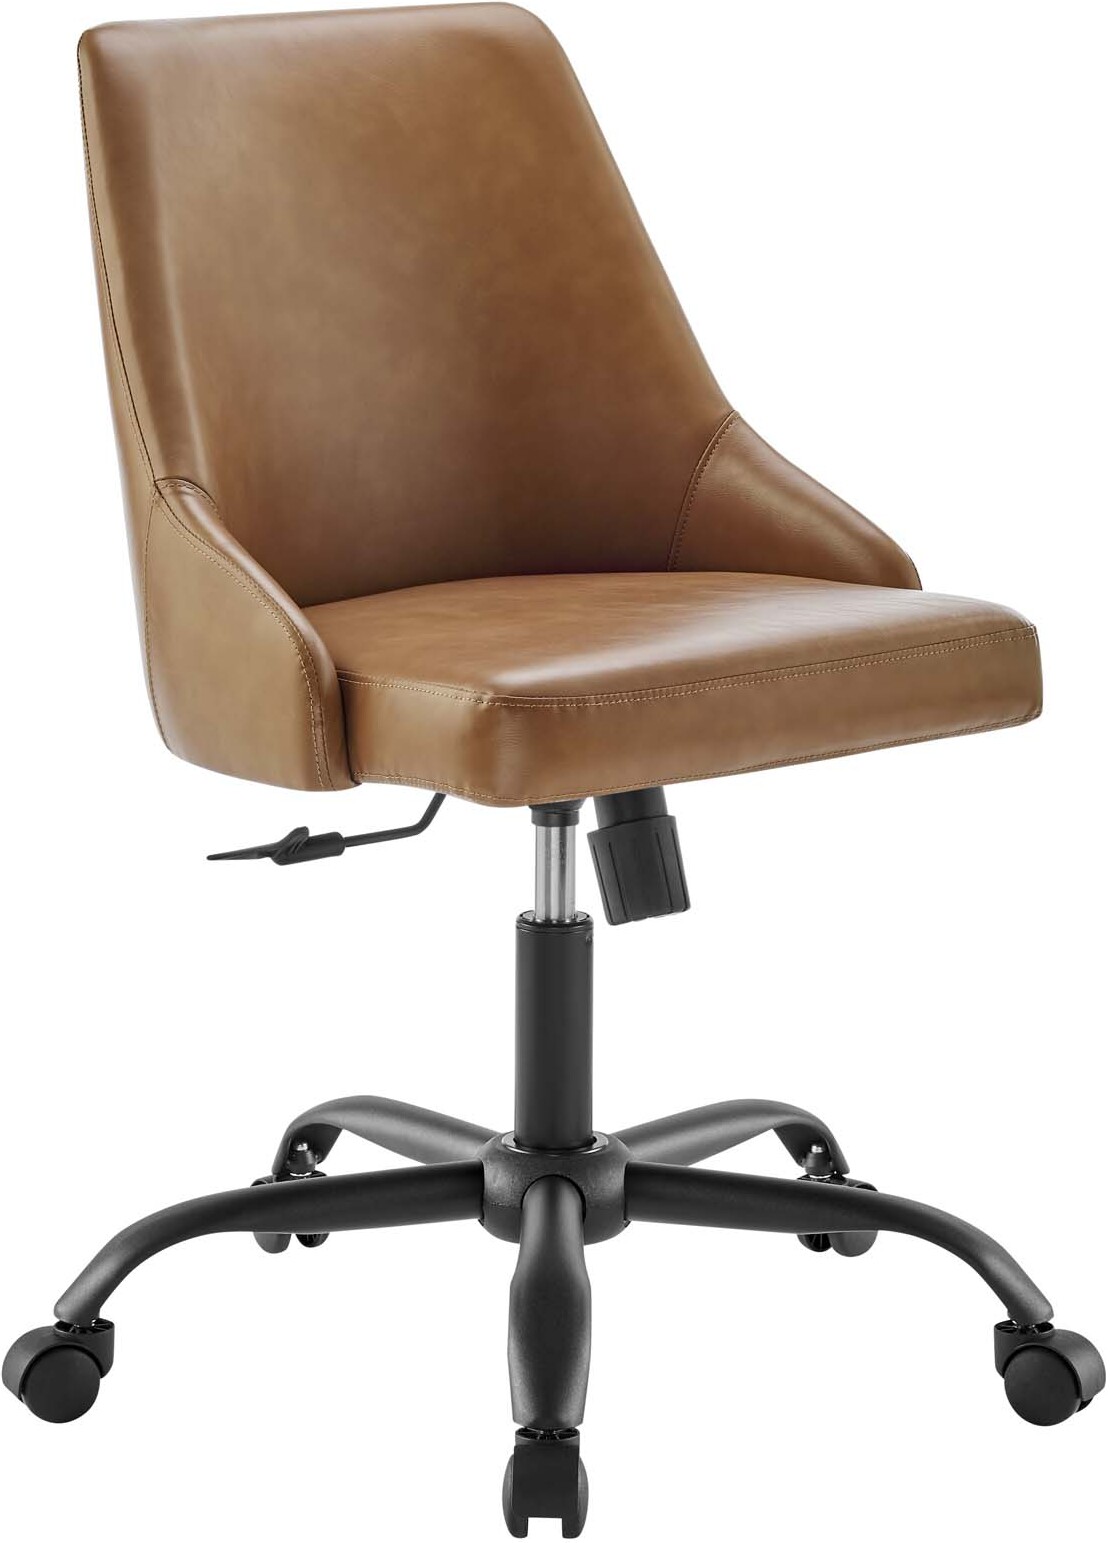 Featured image of post Leather Tan Office Chair : The most ergonomic one will look classy and make you feel comfortable.